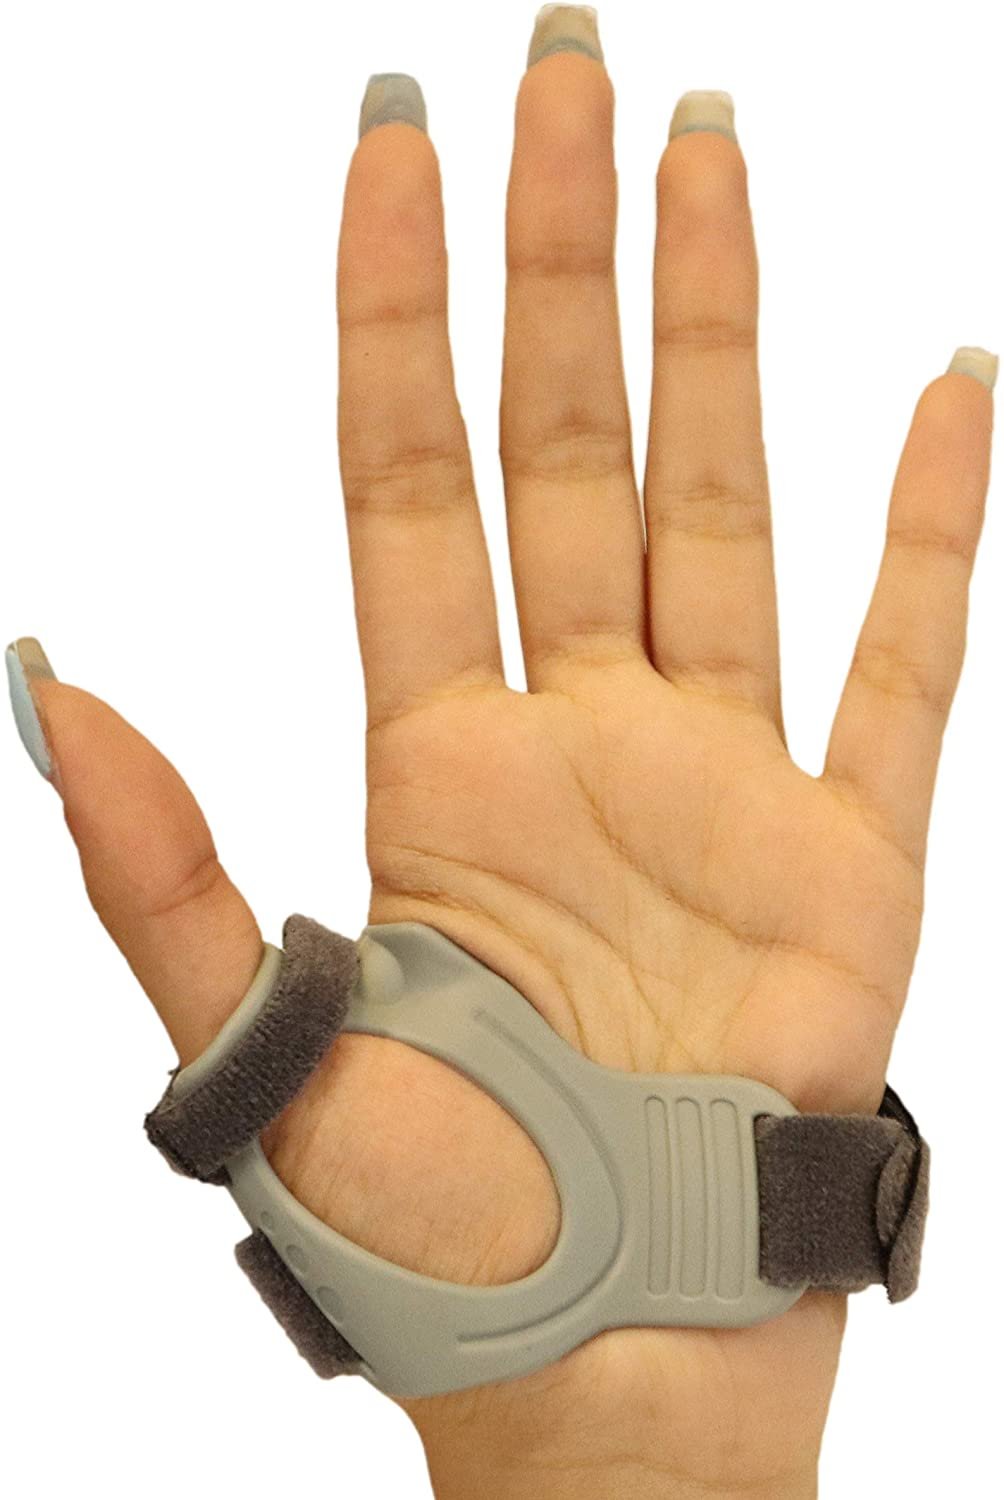 Choosing a Thumb Splint or Brace – Which One Is Right for You? - OMA - Oh  My Arthritis